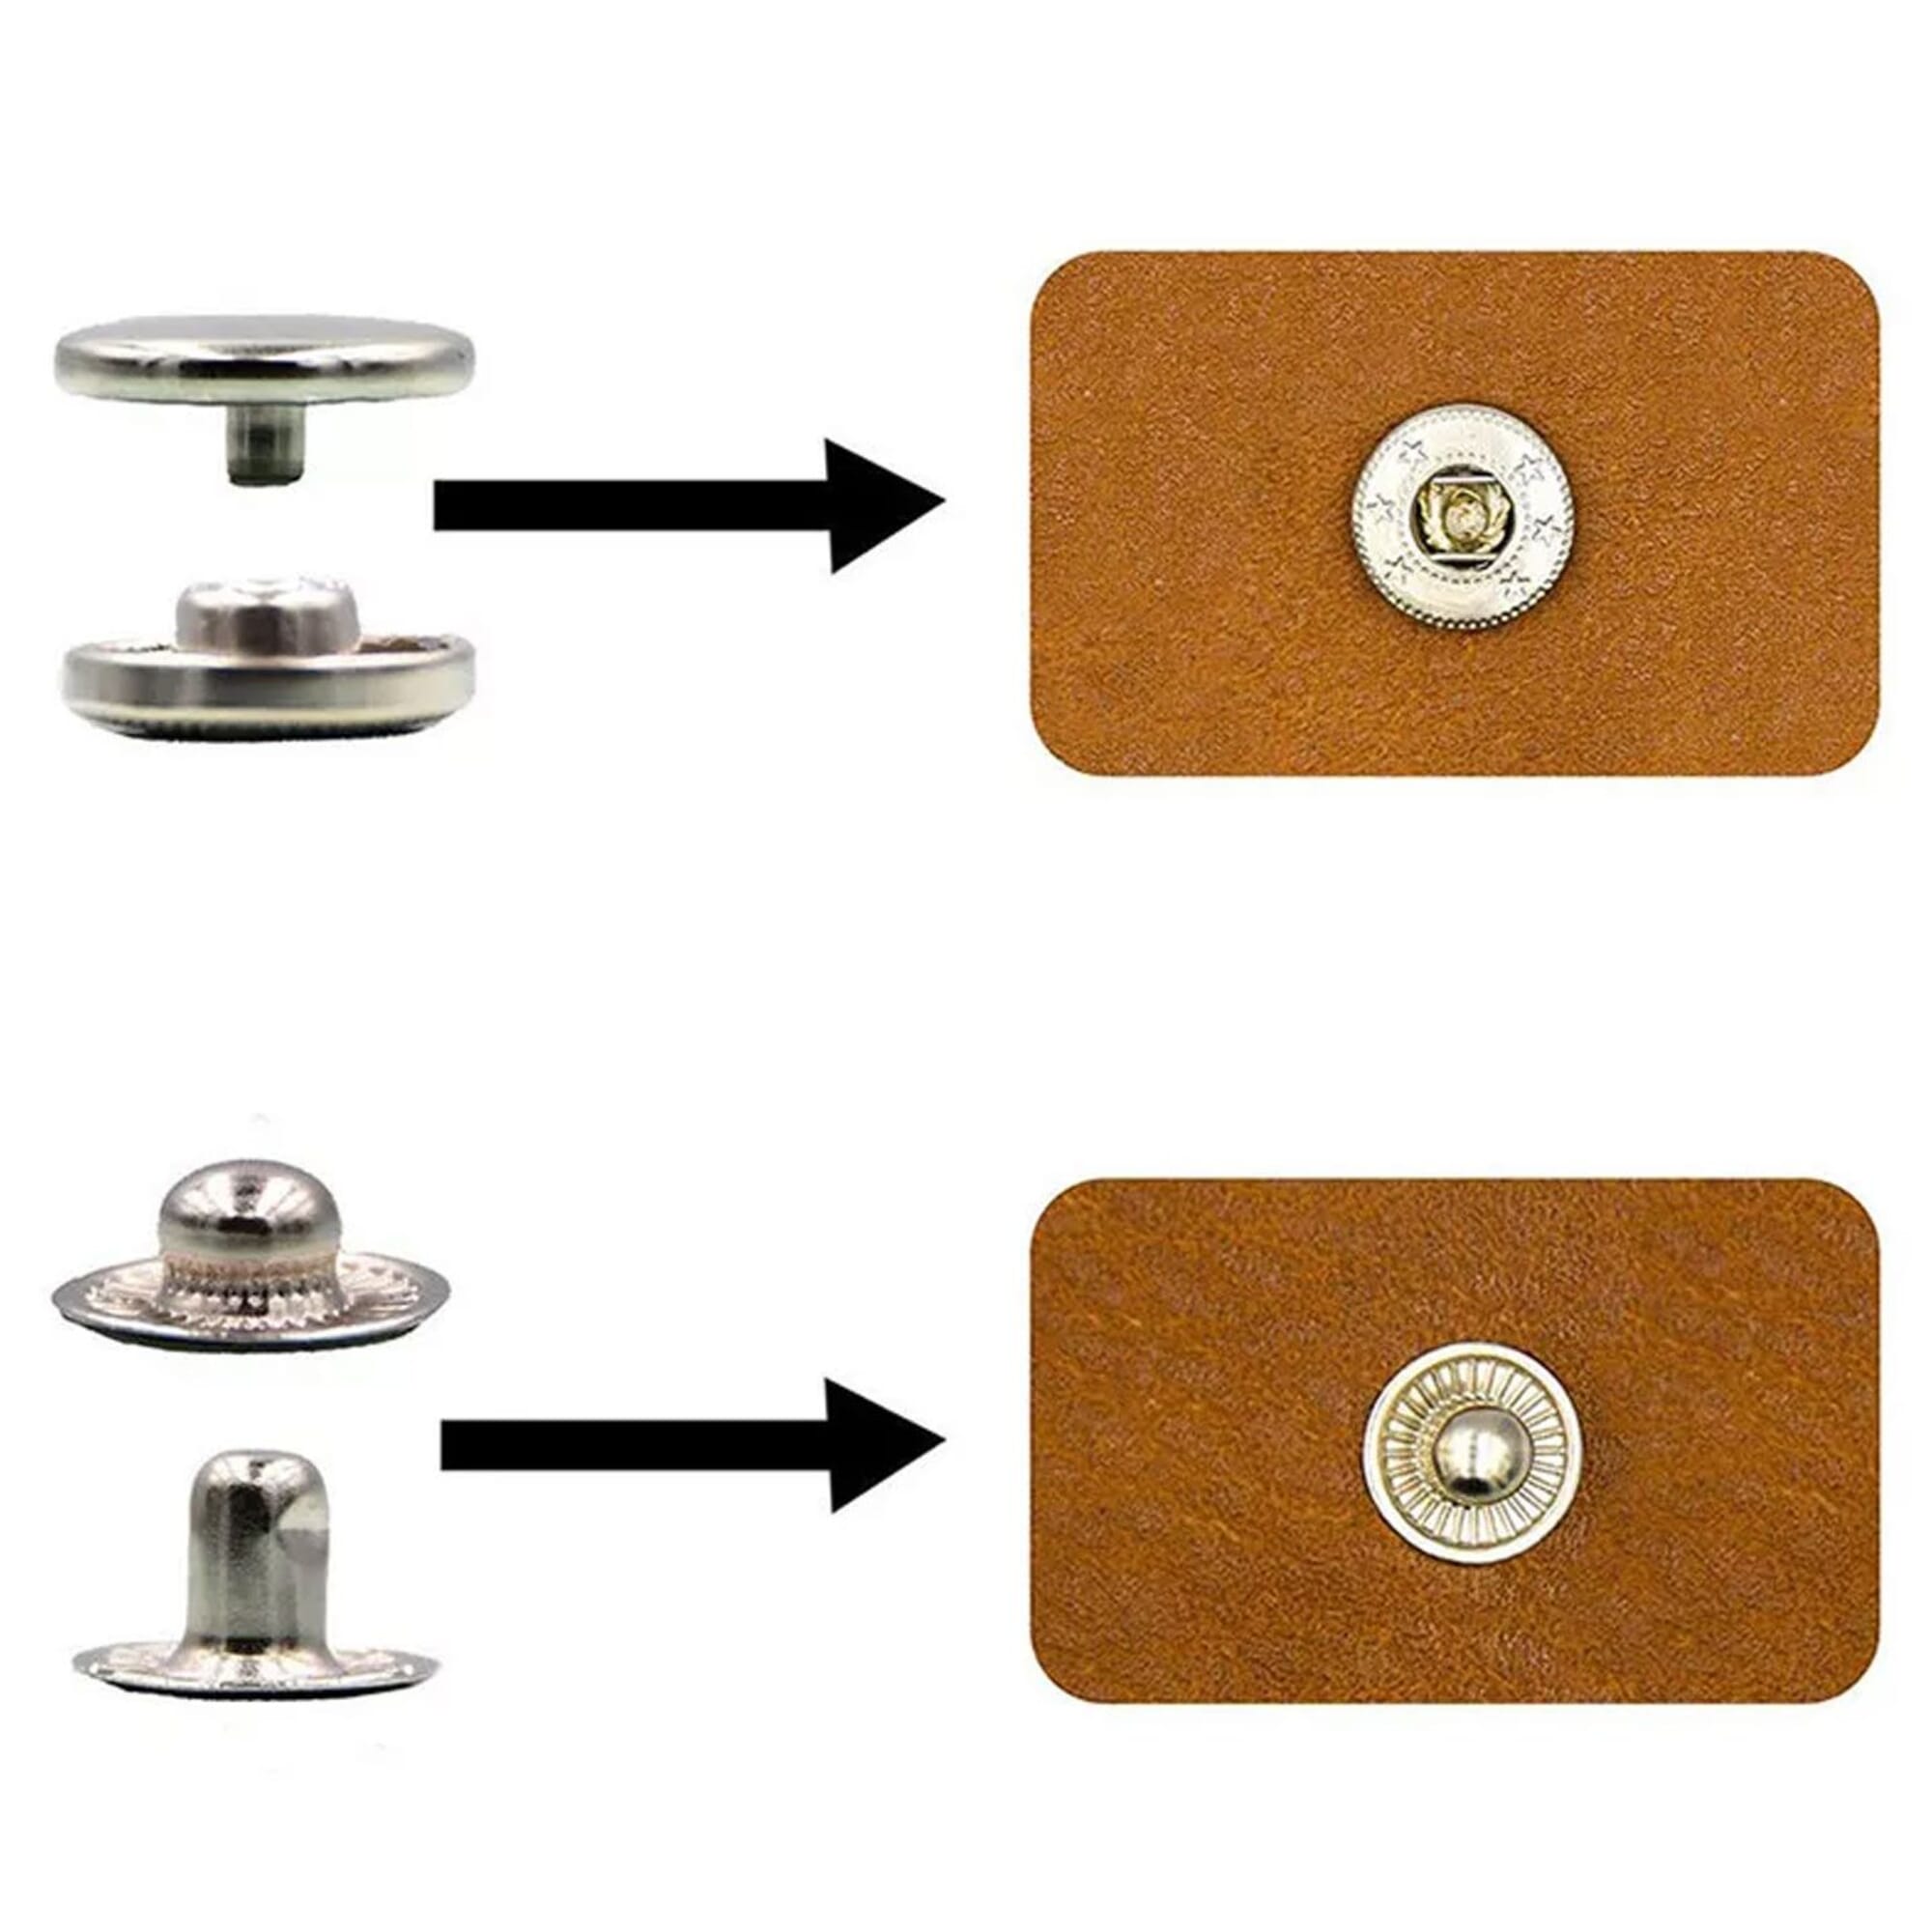 Press buttons: also called press fasteners